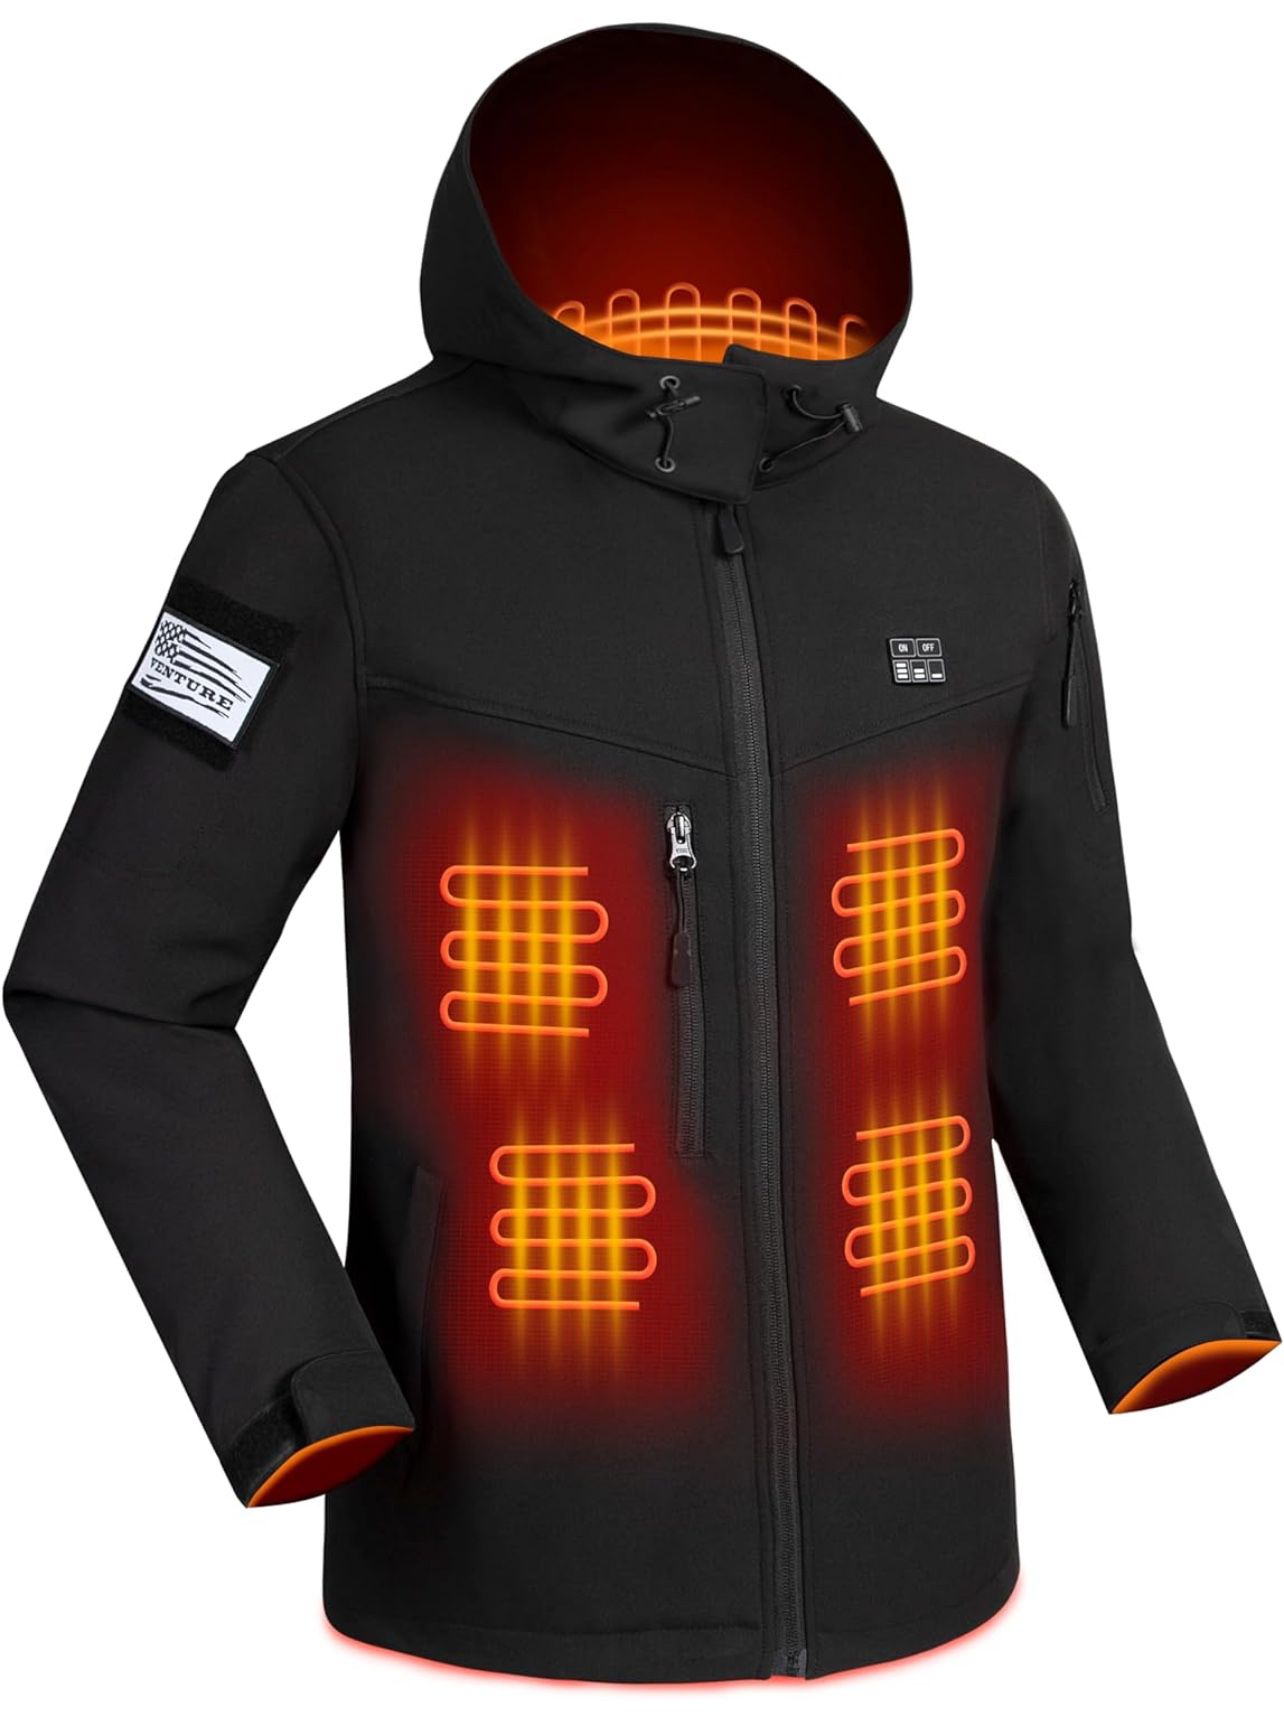 Men's Heated Fleece Jacket, Heated Jacket for Men with 10000mAh Large Capacity Battery Pack and Hand Warm Pockets